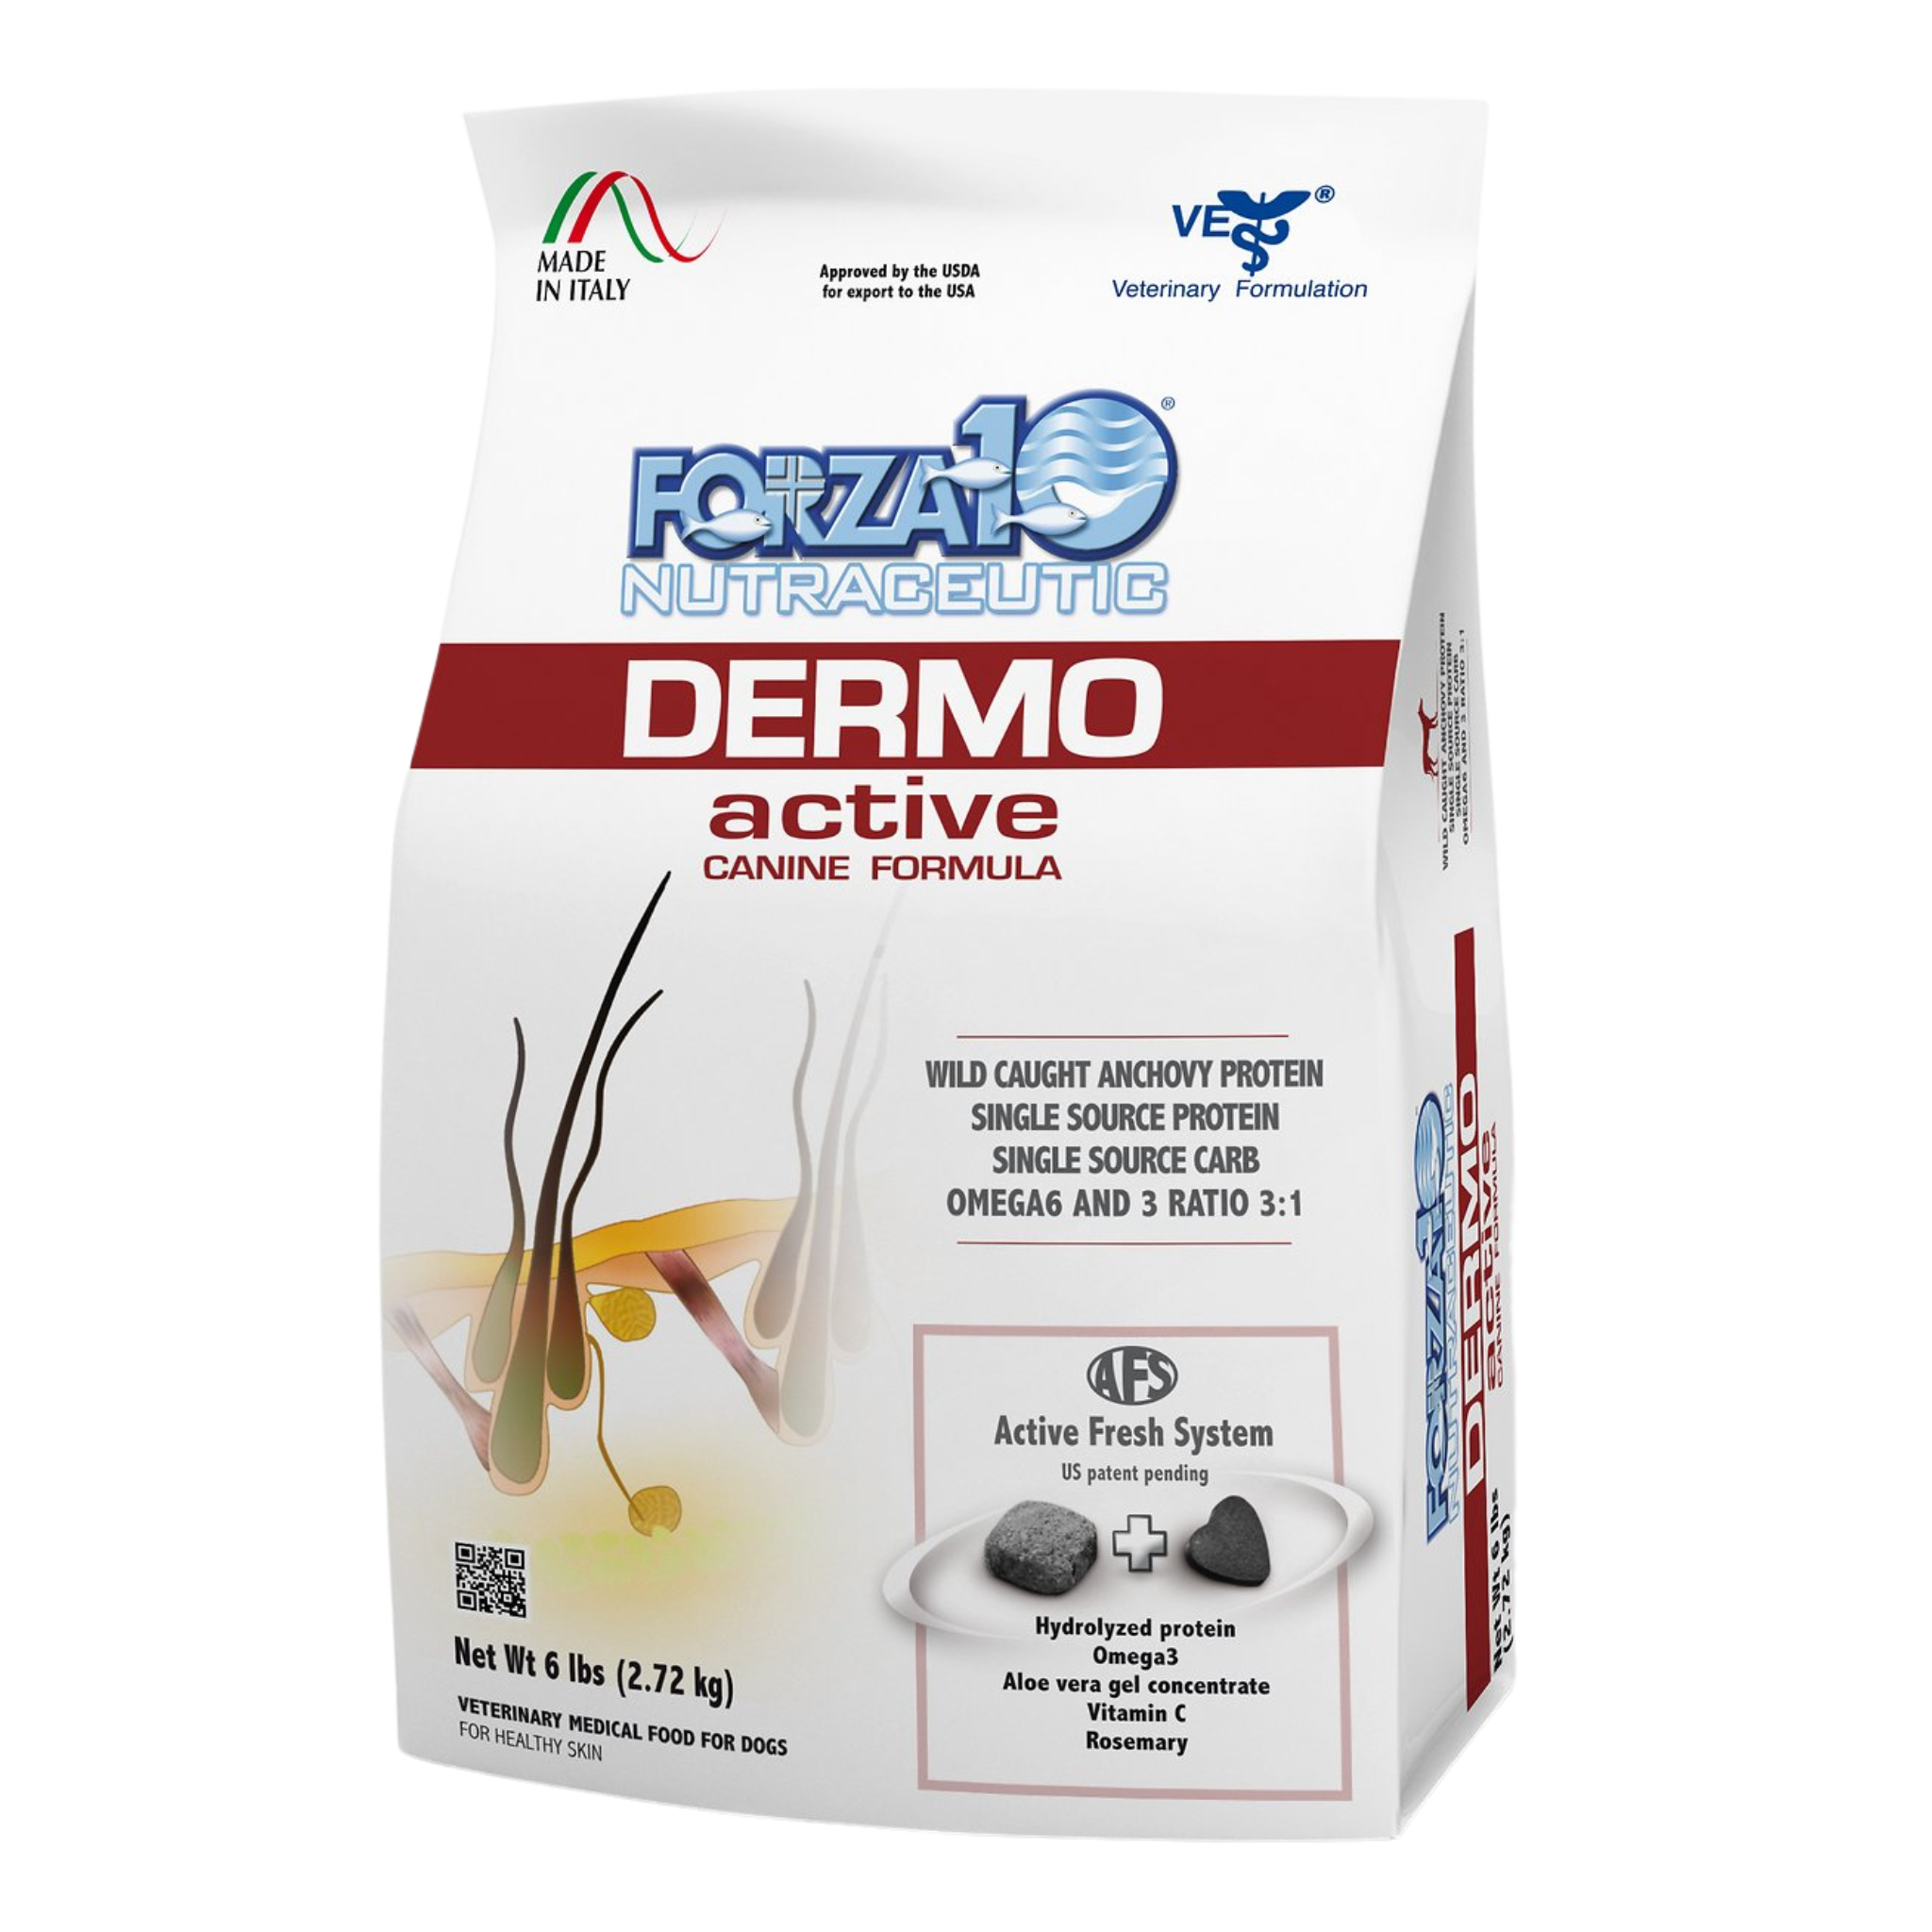 Forza10 Nutraceutic Active Dermo Dry Dog Food - Mutts & Co.